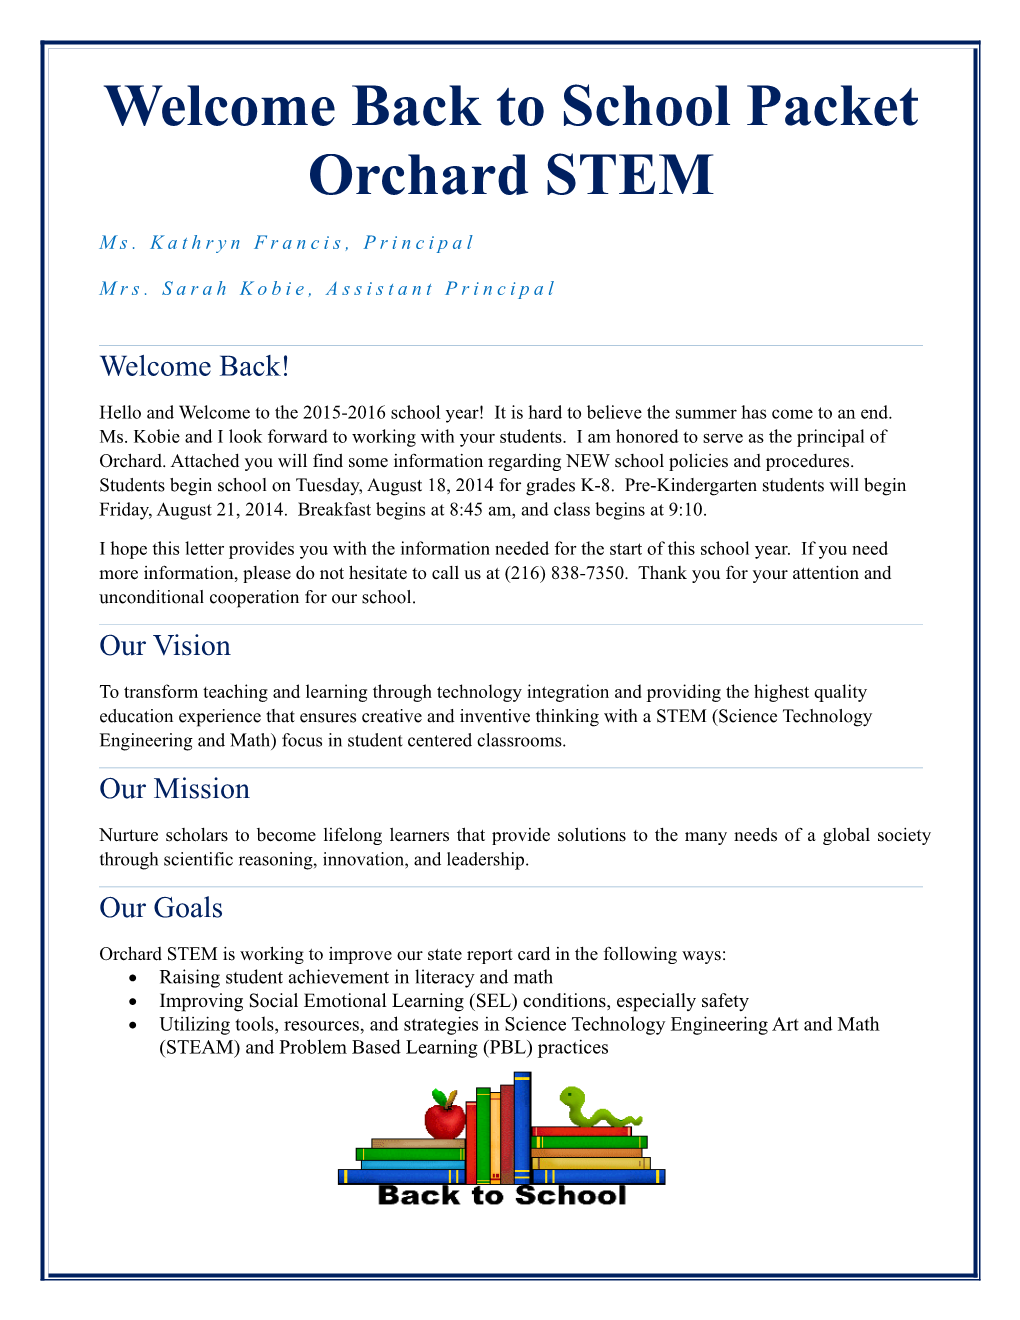 Welcome Back to School Packet Orchard STEM